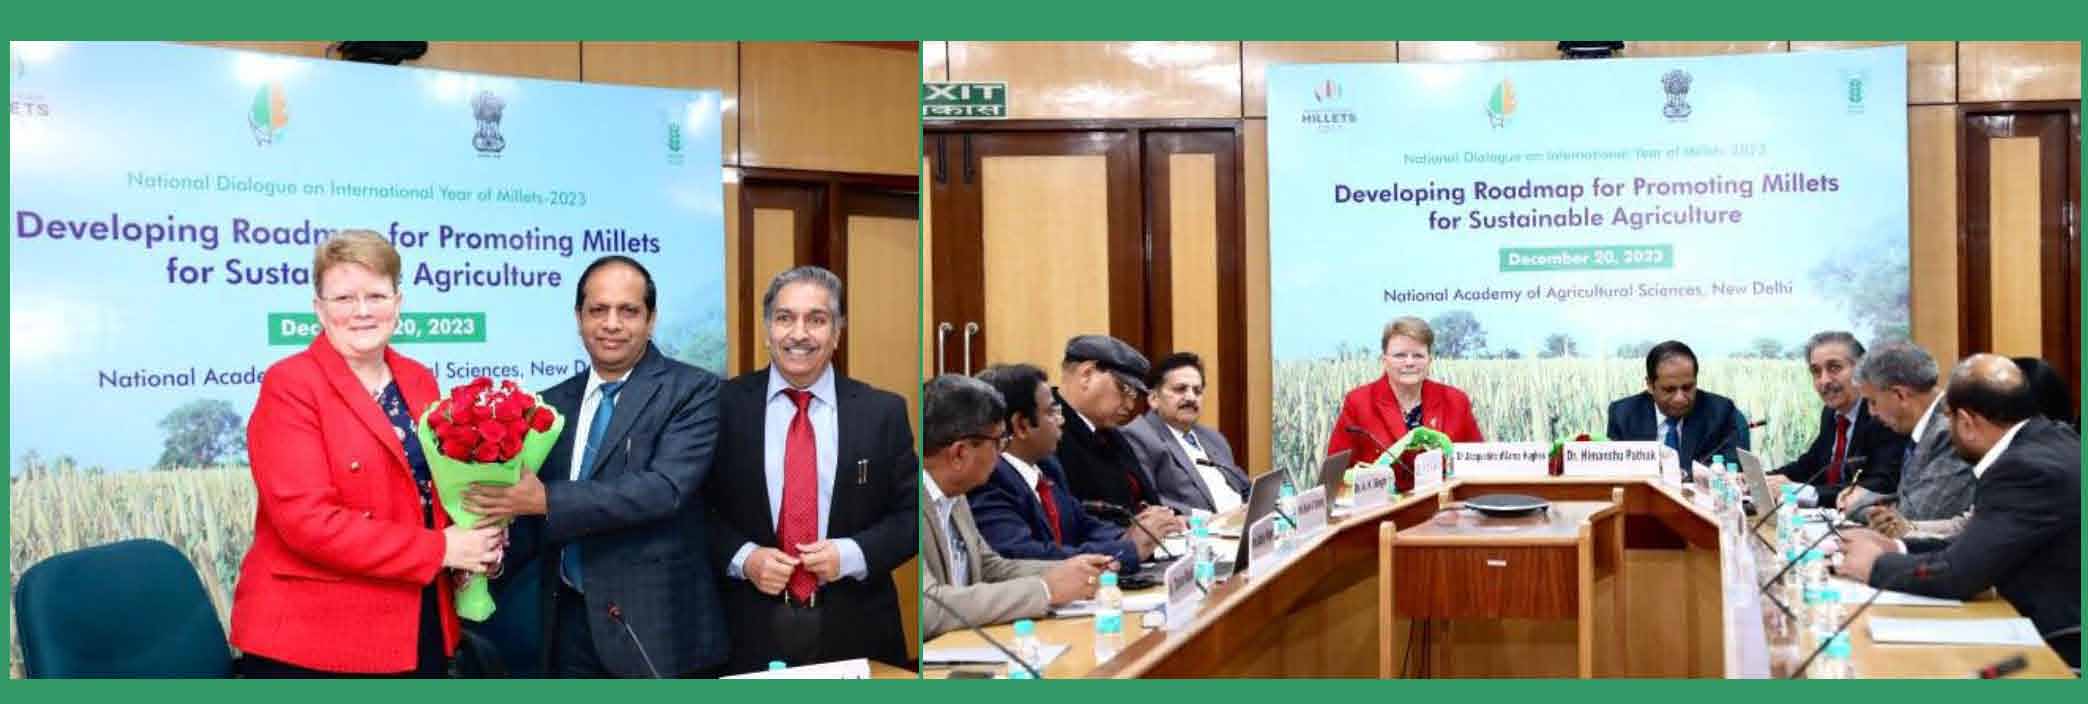 National Dialogue on International Year of Millets 2023 – Developing Roadmap for Promoting Millets for Sustainable Agriculture